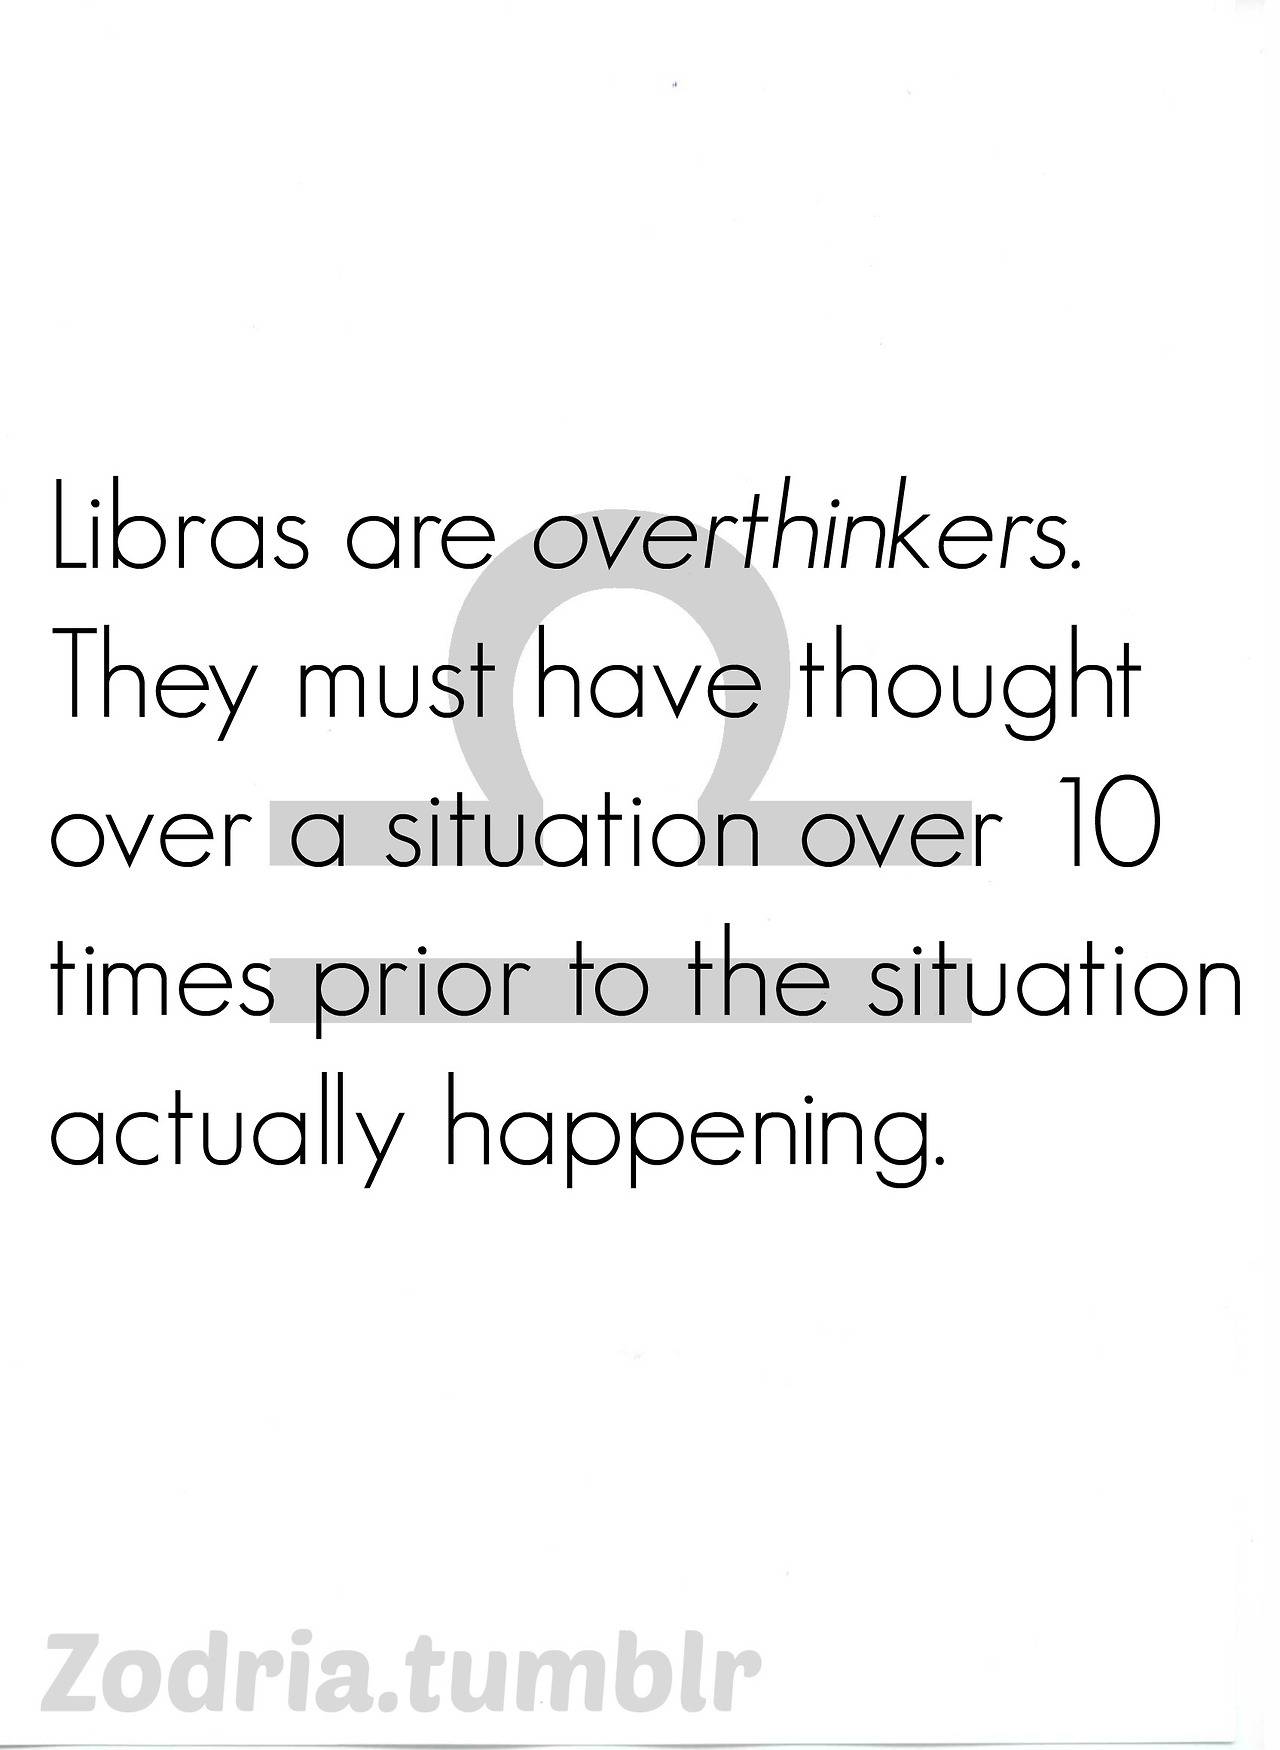 Libra Quotes And Sayings. QuotesGram1280 x 1750